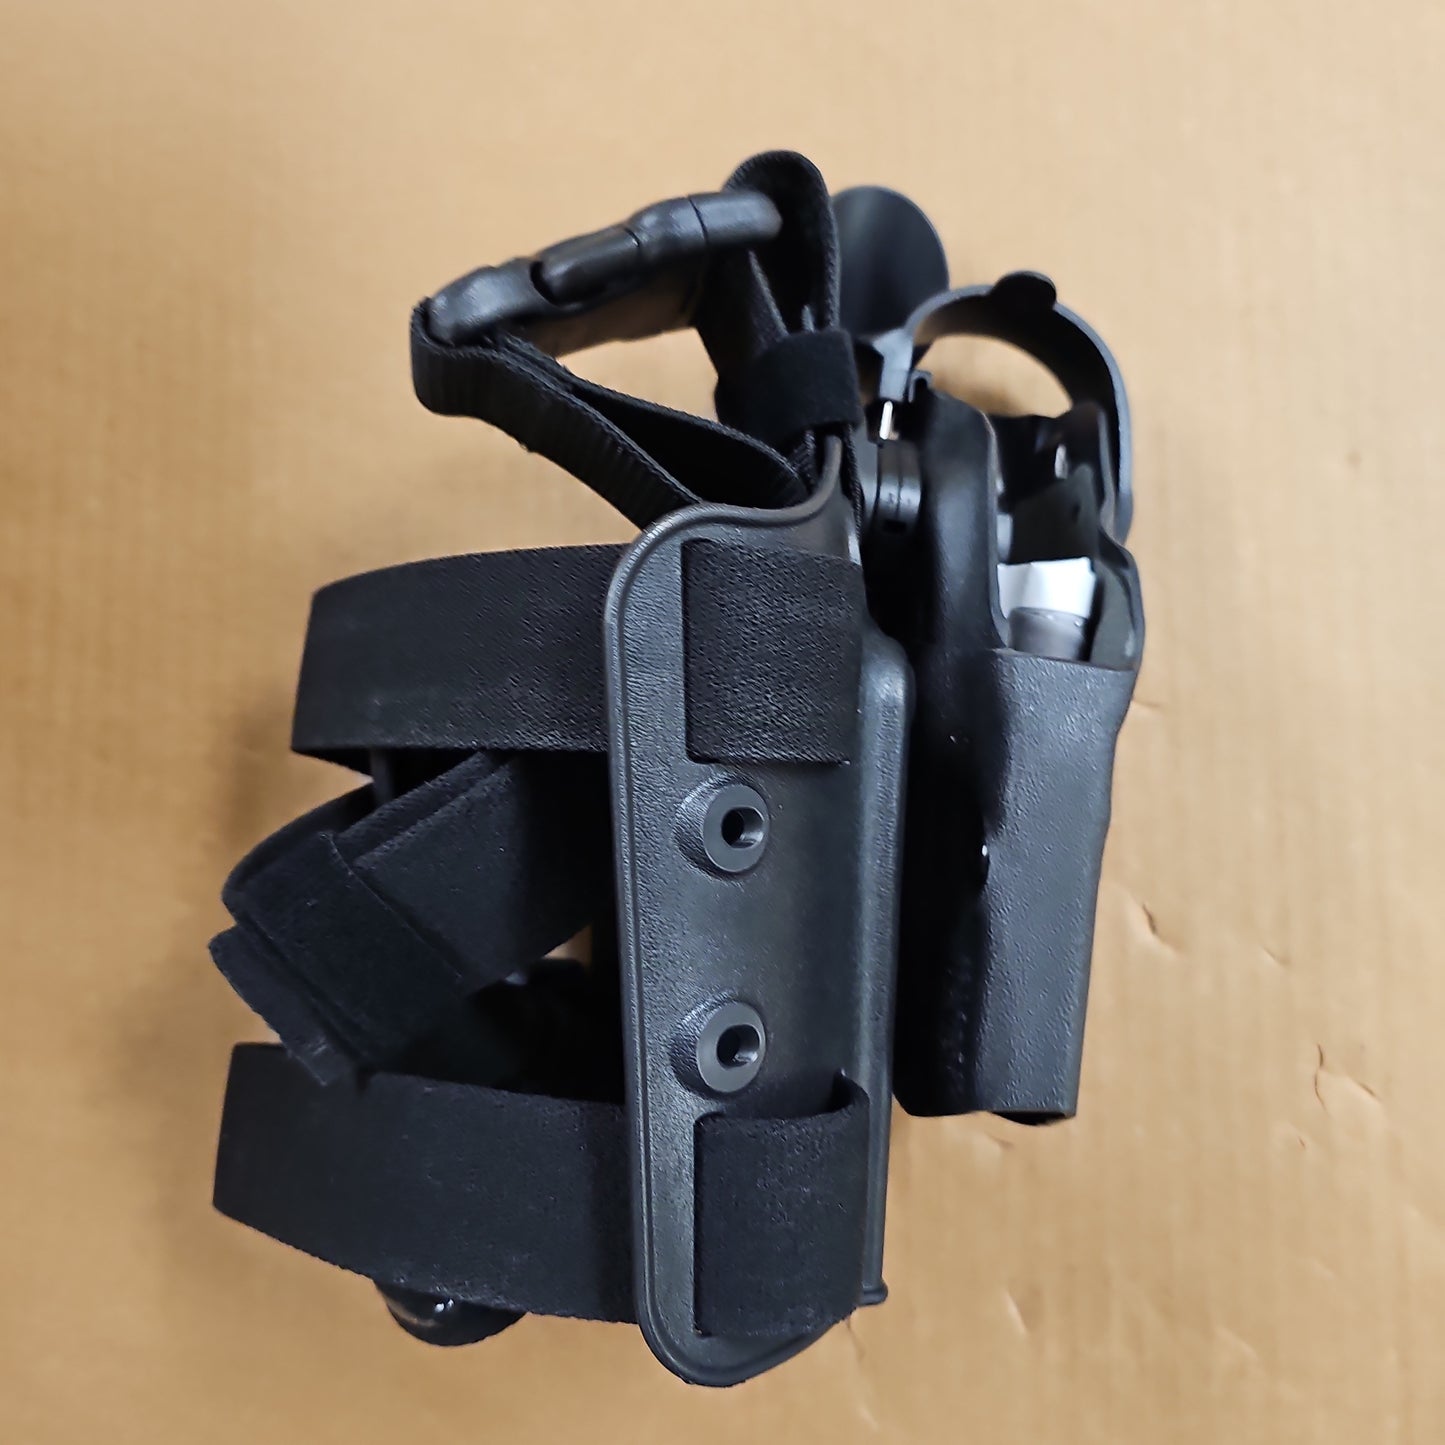 Safariland Holster TACTICAL ALS QR HARNESS Right Hand for HK VP9 6305-593-131